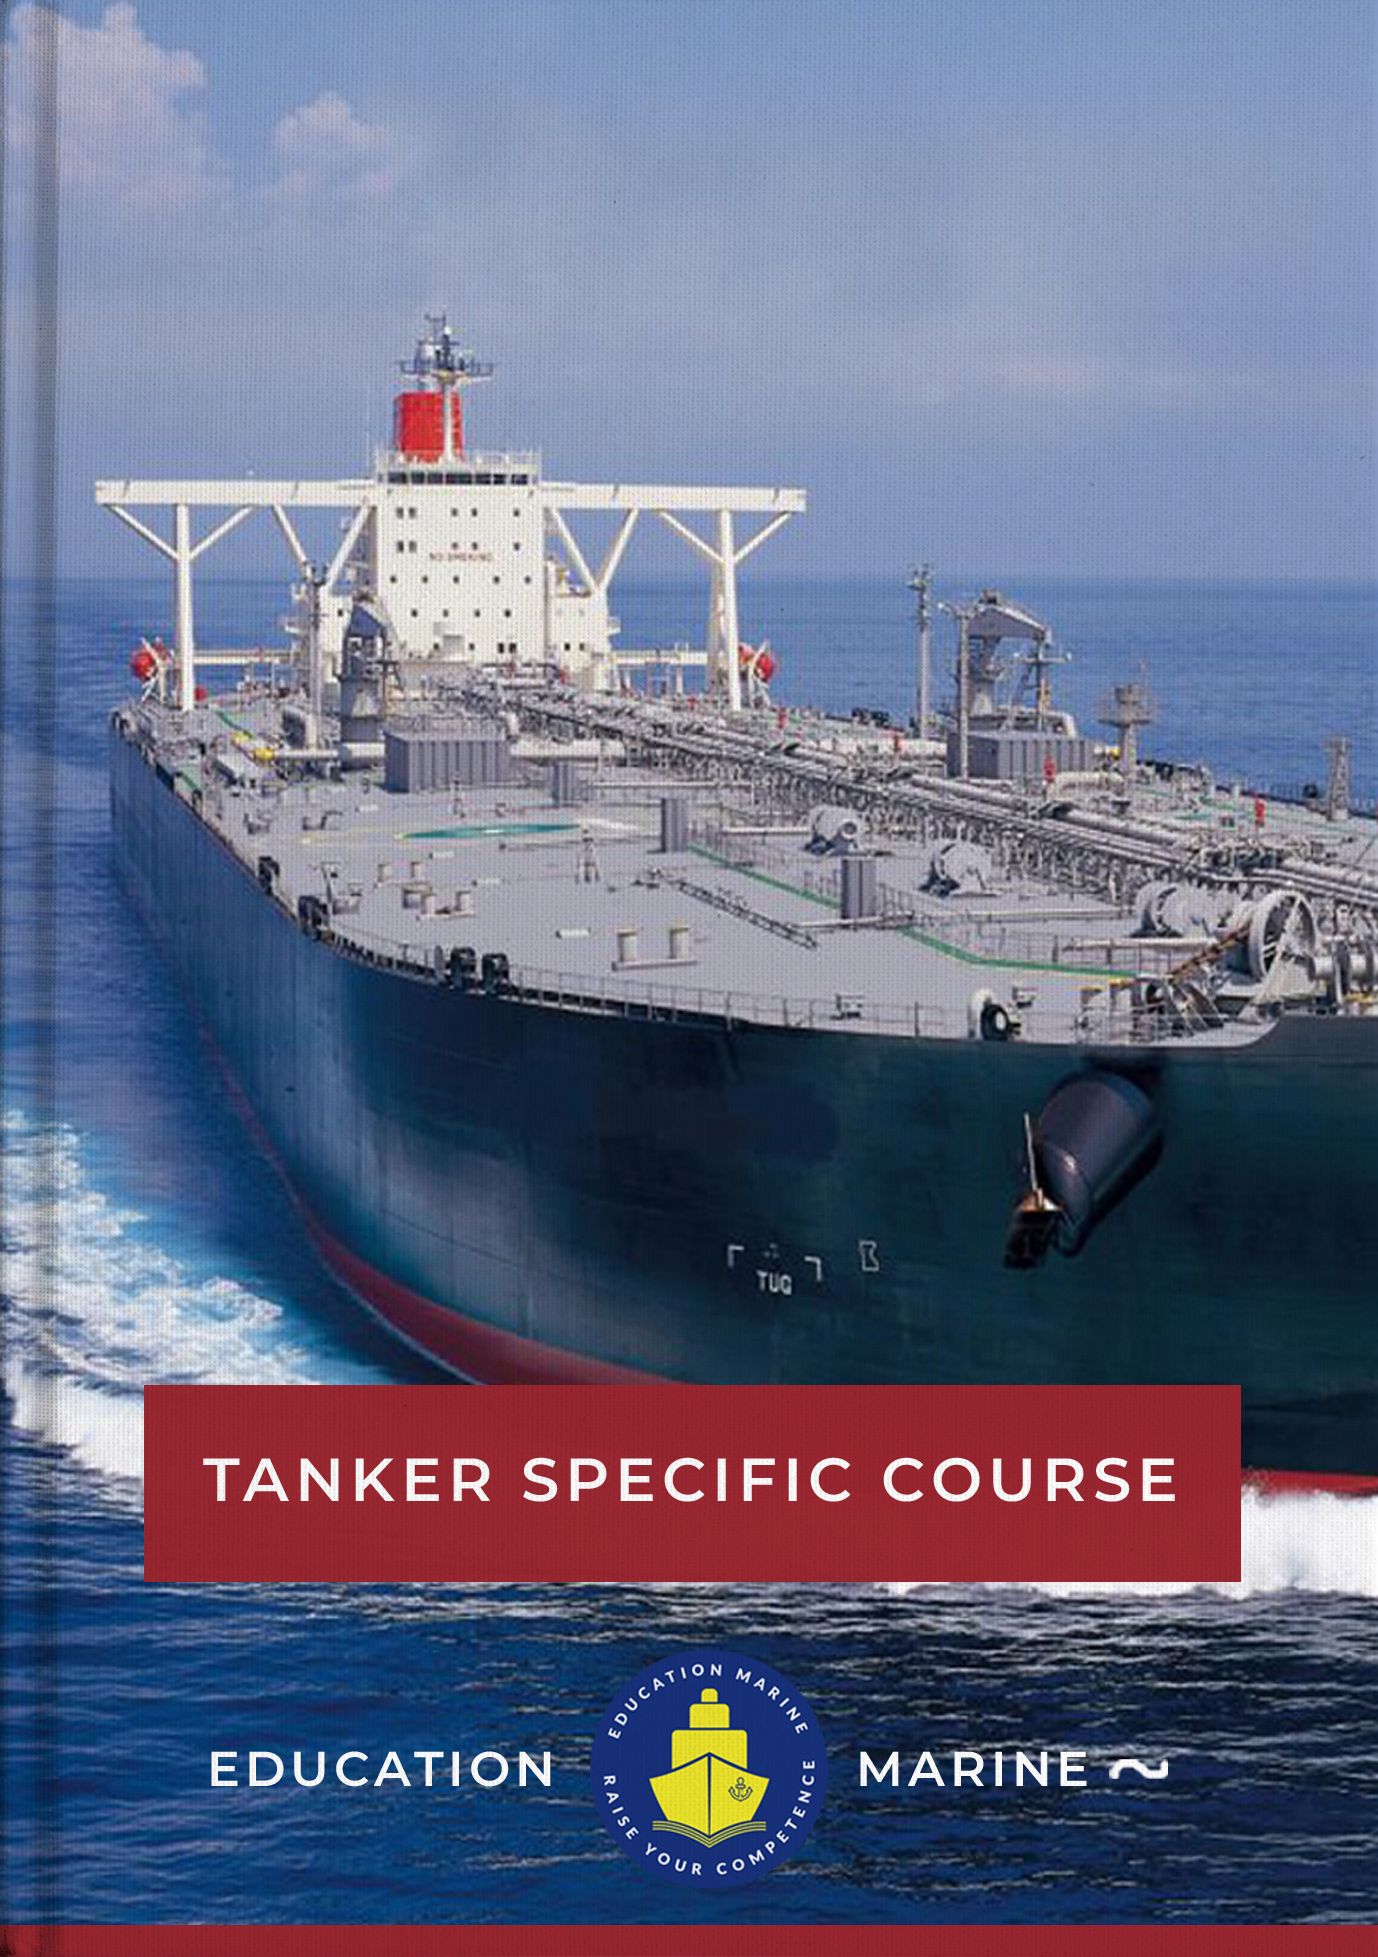 Tanker specific course